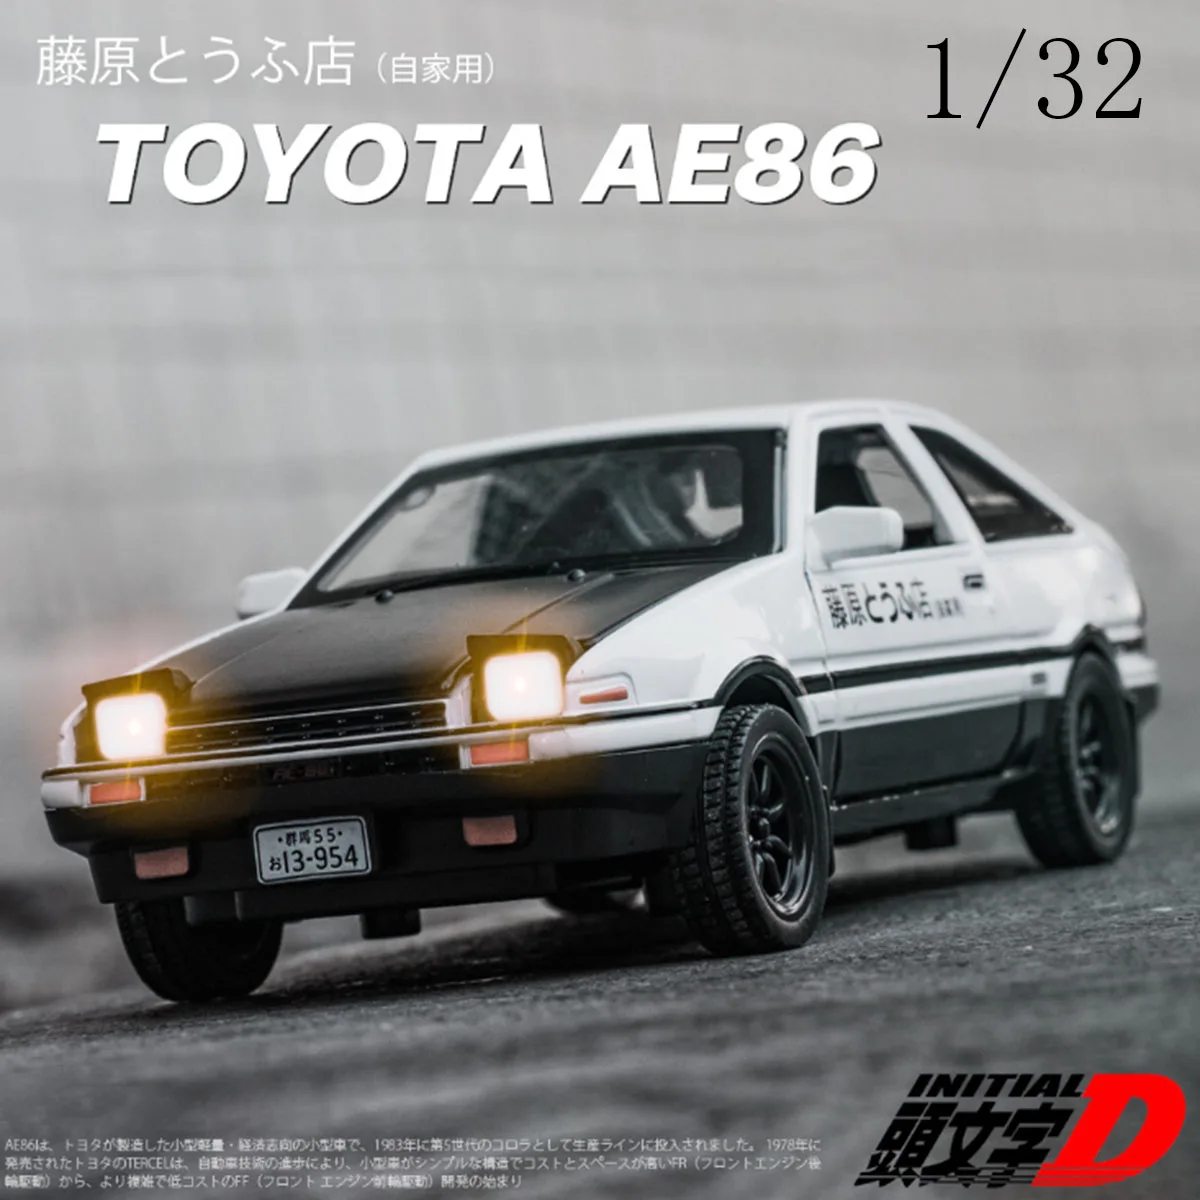 

1:32 Scale INITIAL D Toyota AE86 Alloy Metal Toy Car Model Diecast Toy Vehicles Cartoon Miniature Model Car Toys For Kids Gifts